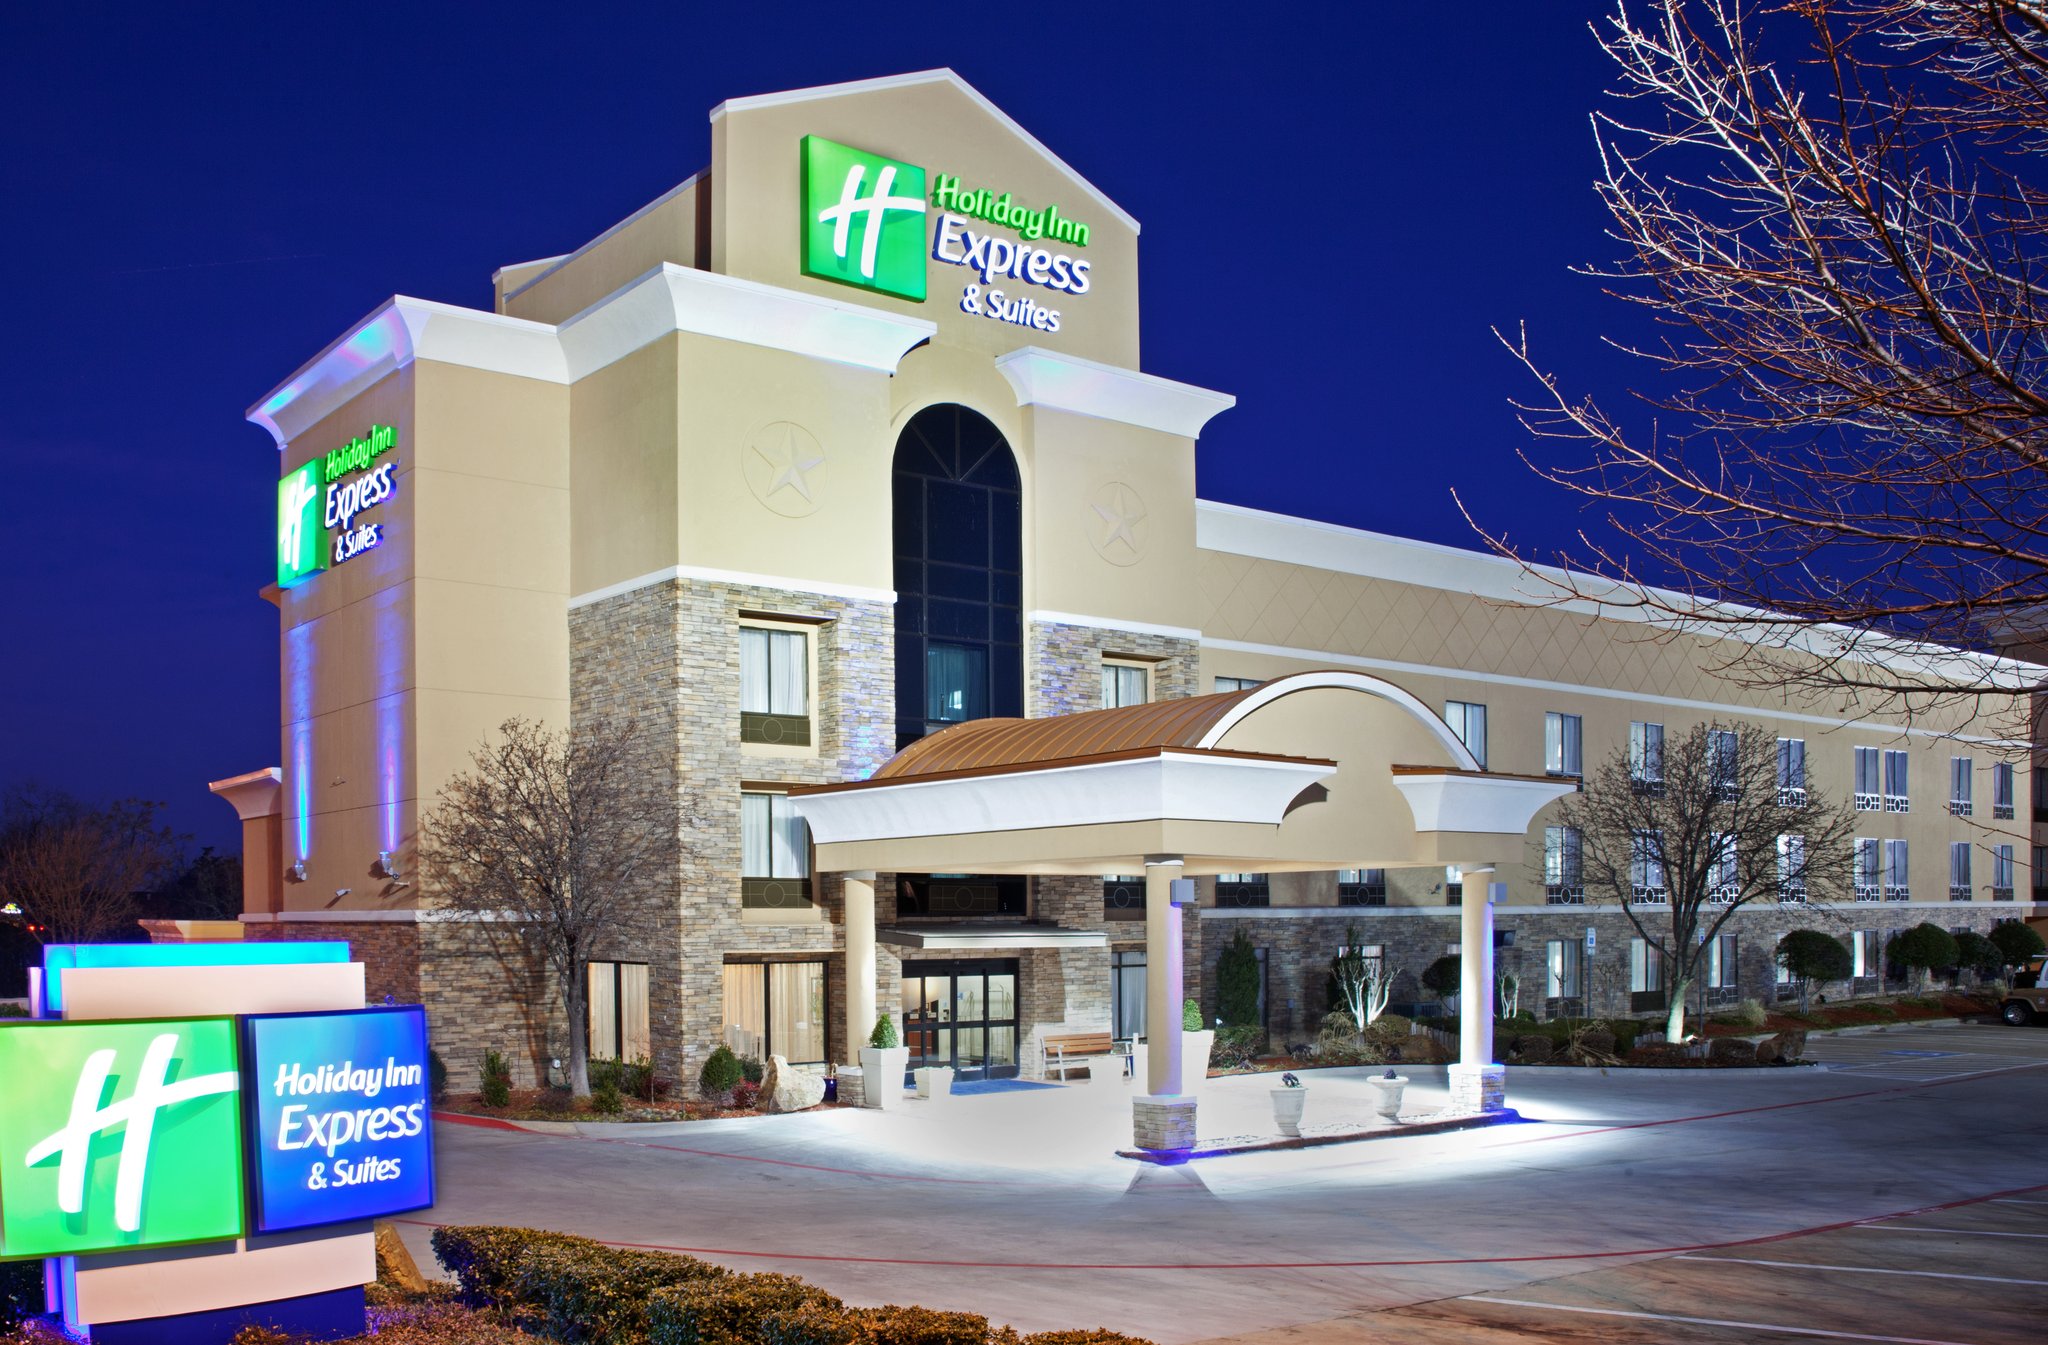 IHG Holiday Inn Express and Suites I-20 Parks Mall, Arlington TX ext